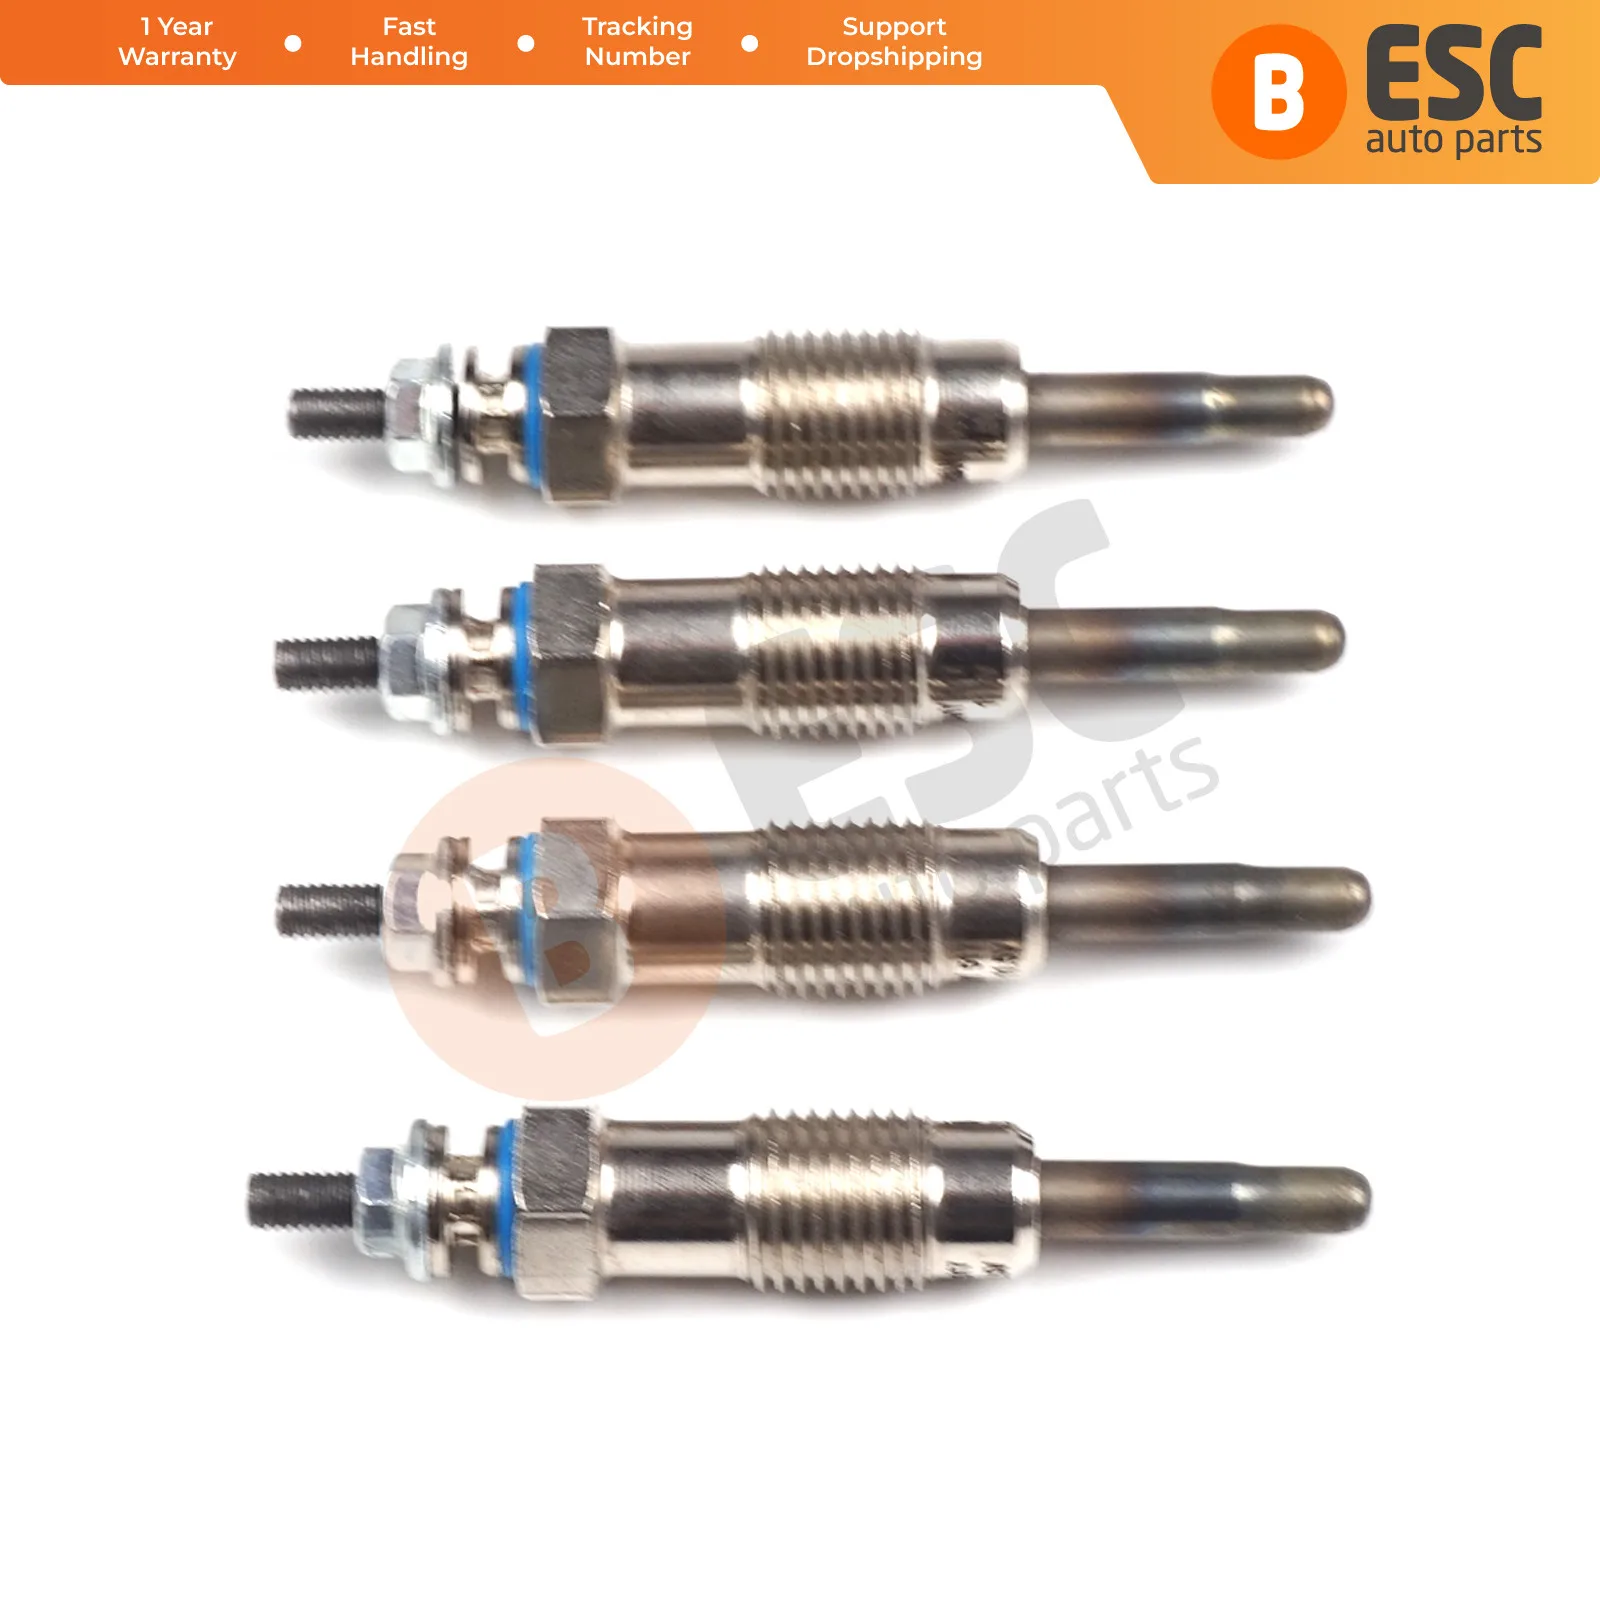 Egp22-1 4 Pcs Heater Glow Plugs Gx66, 7088988, Gv666, 0100221146 For Ford Fiat Renault Opel Ship From Turkey